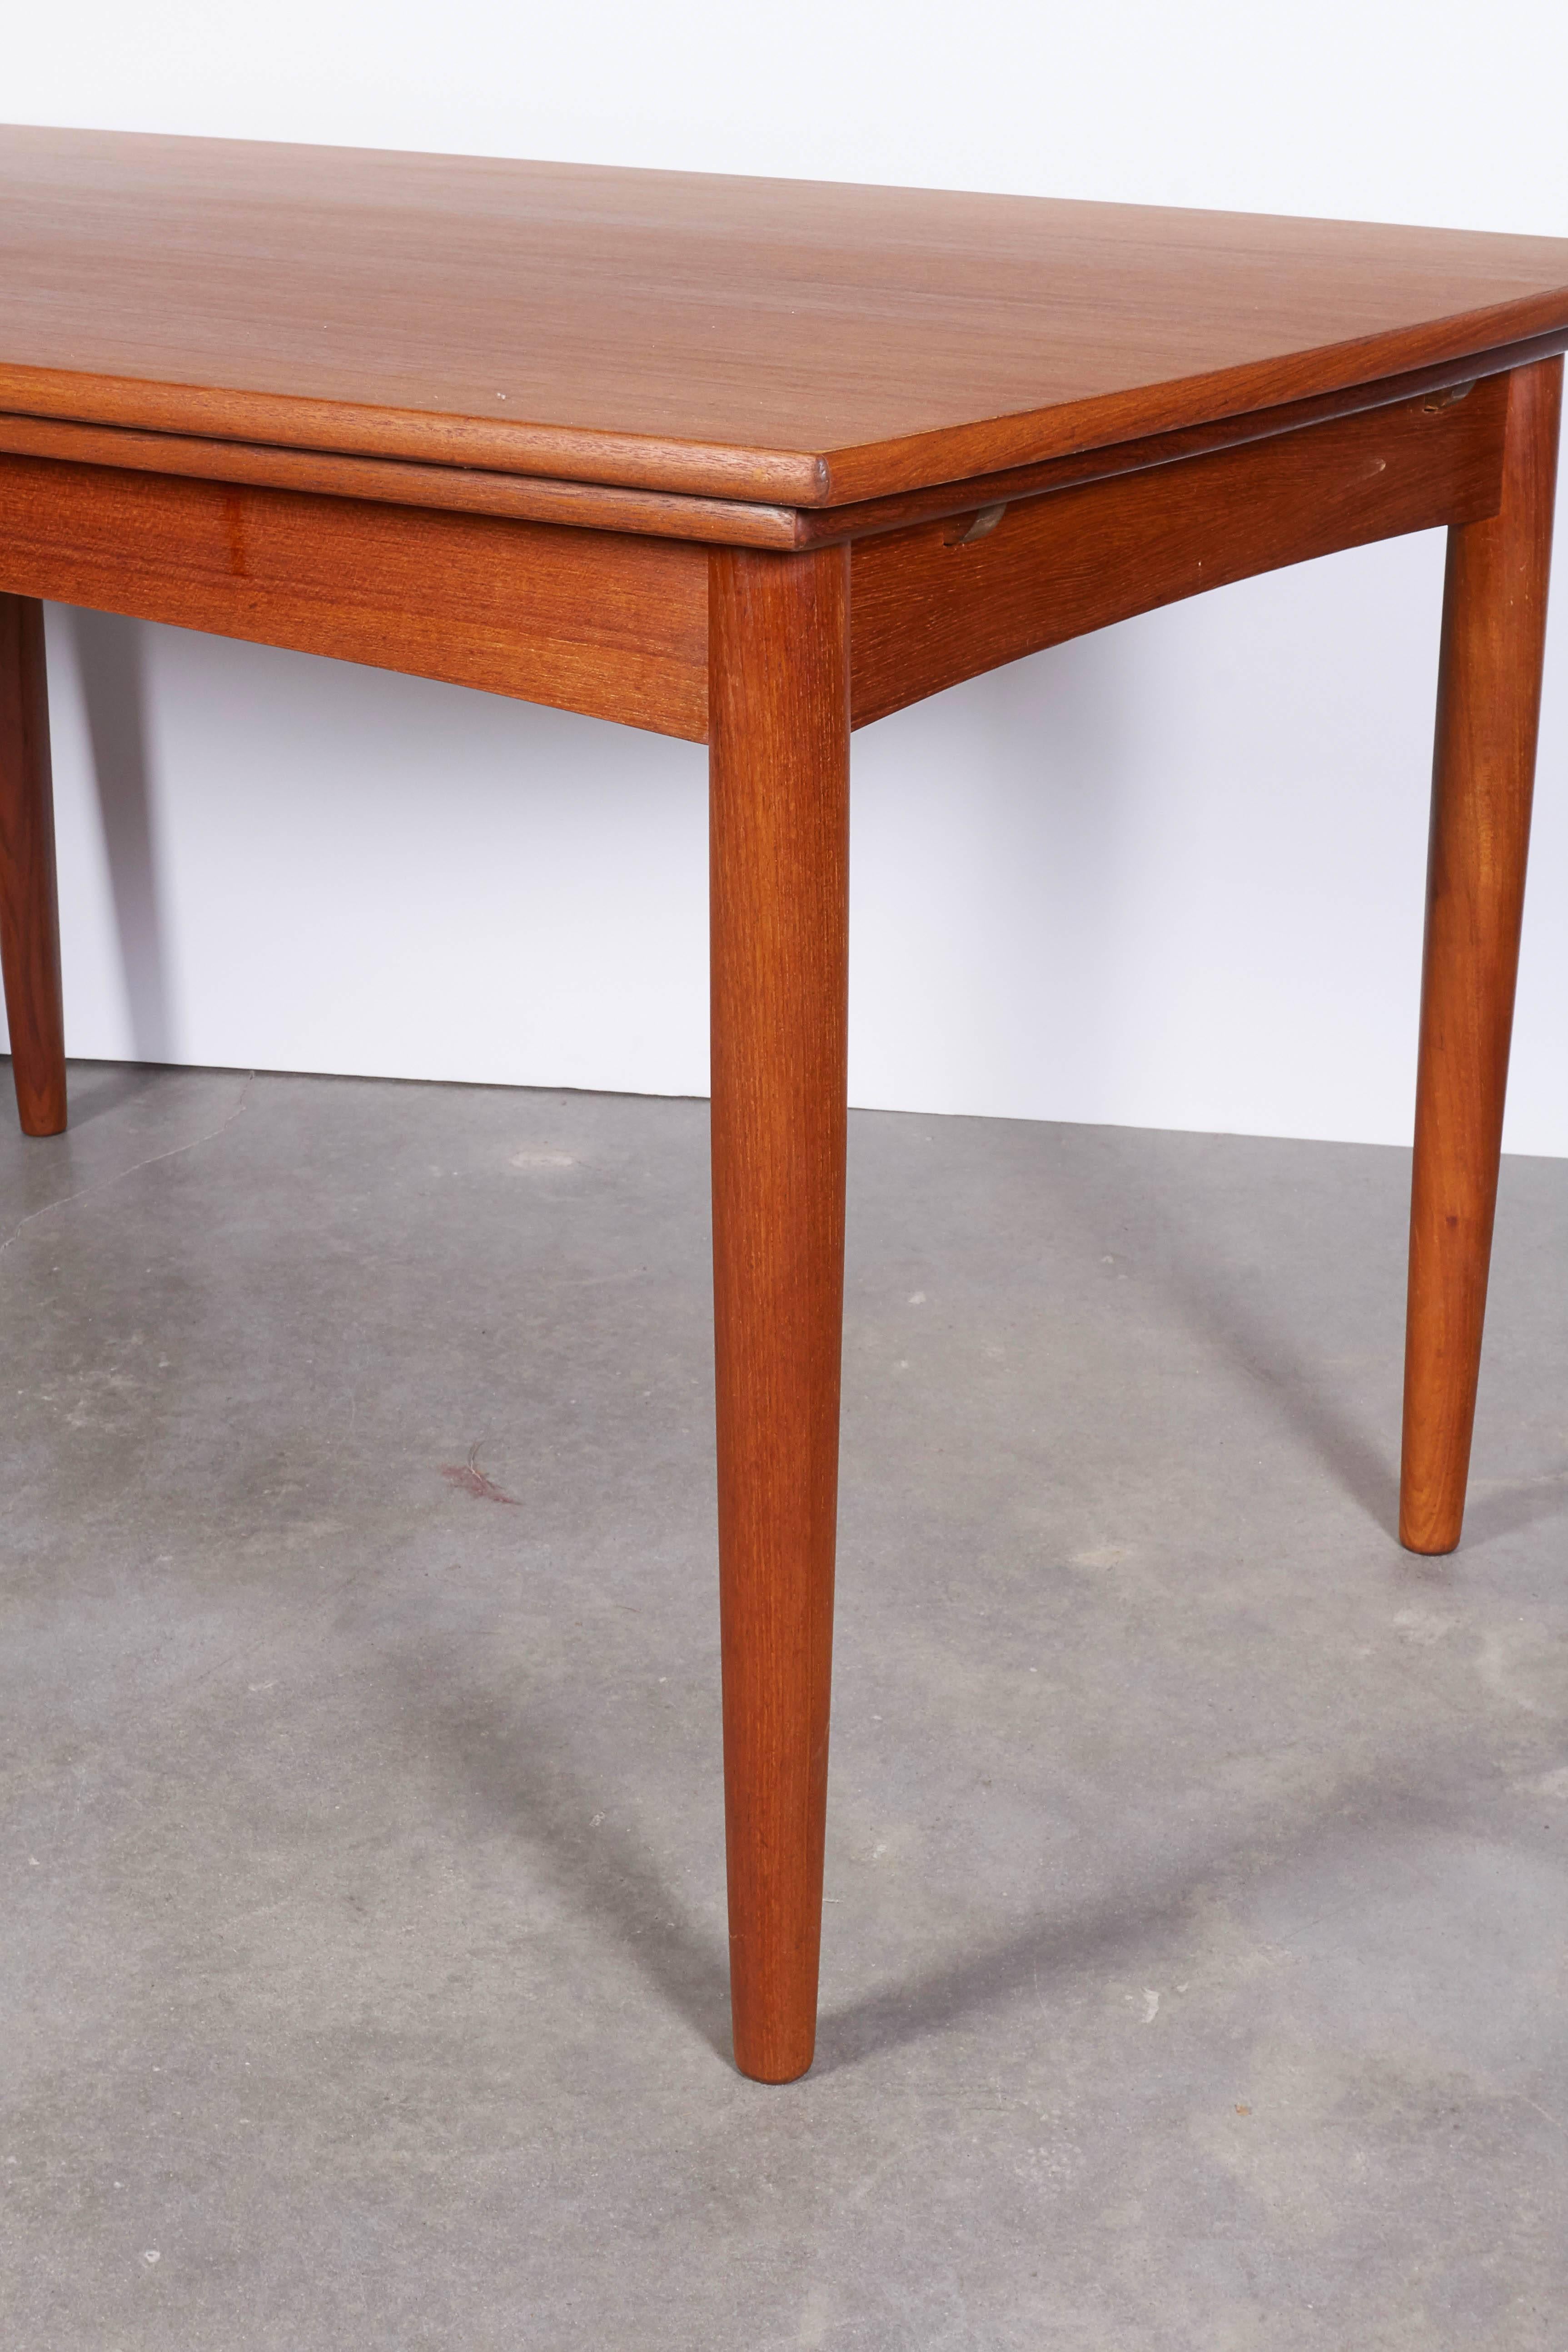 Mid-20th Century Danish Modern Dining Table, Expandable